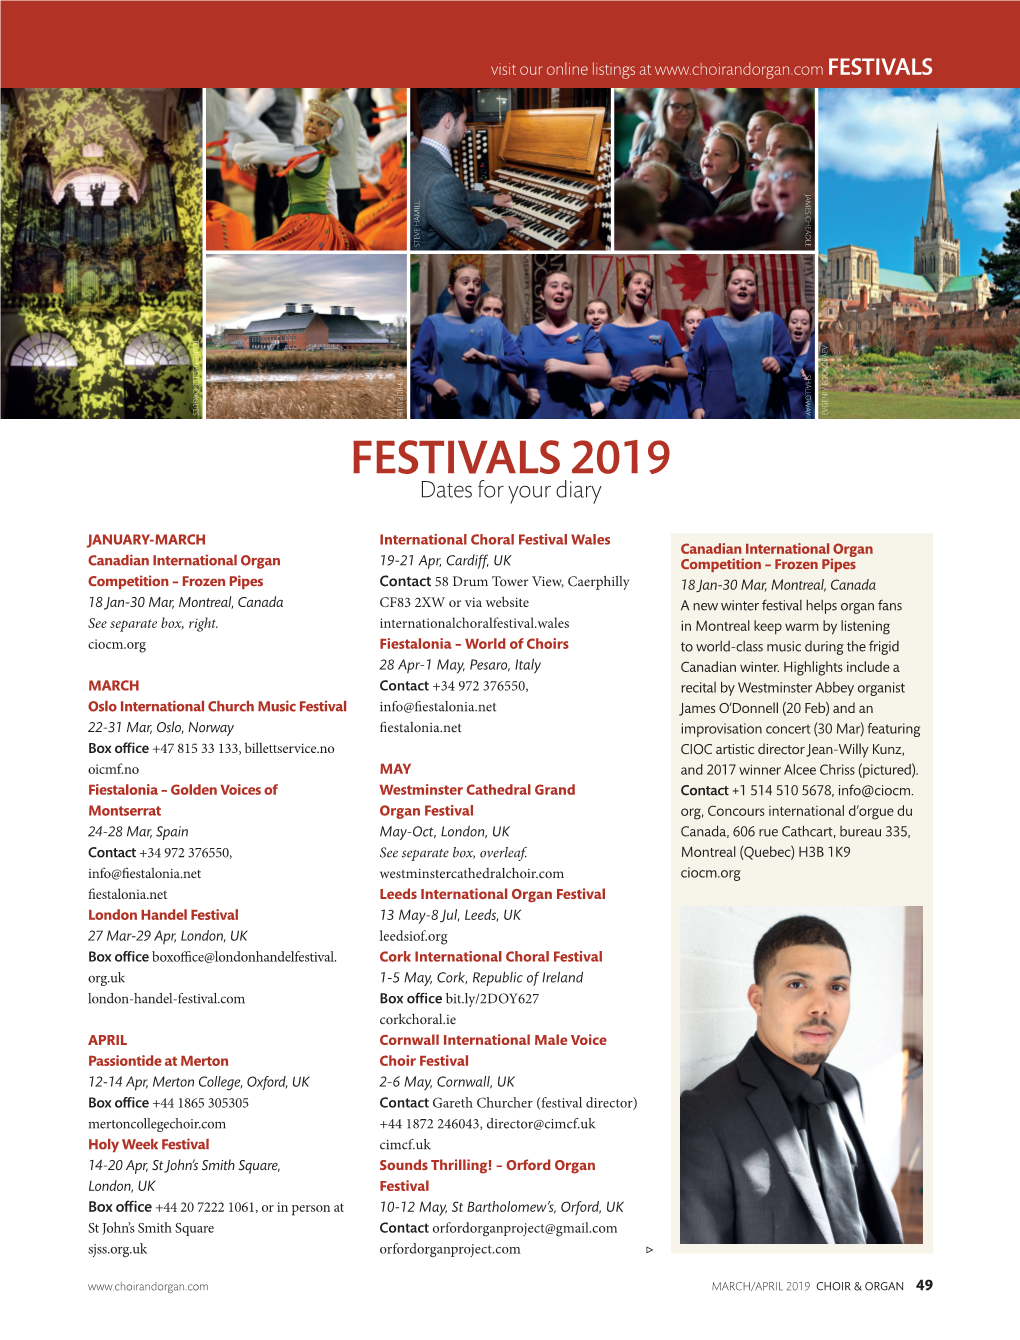 FESTIVALS 2019 Dates for Your Diary